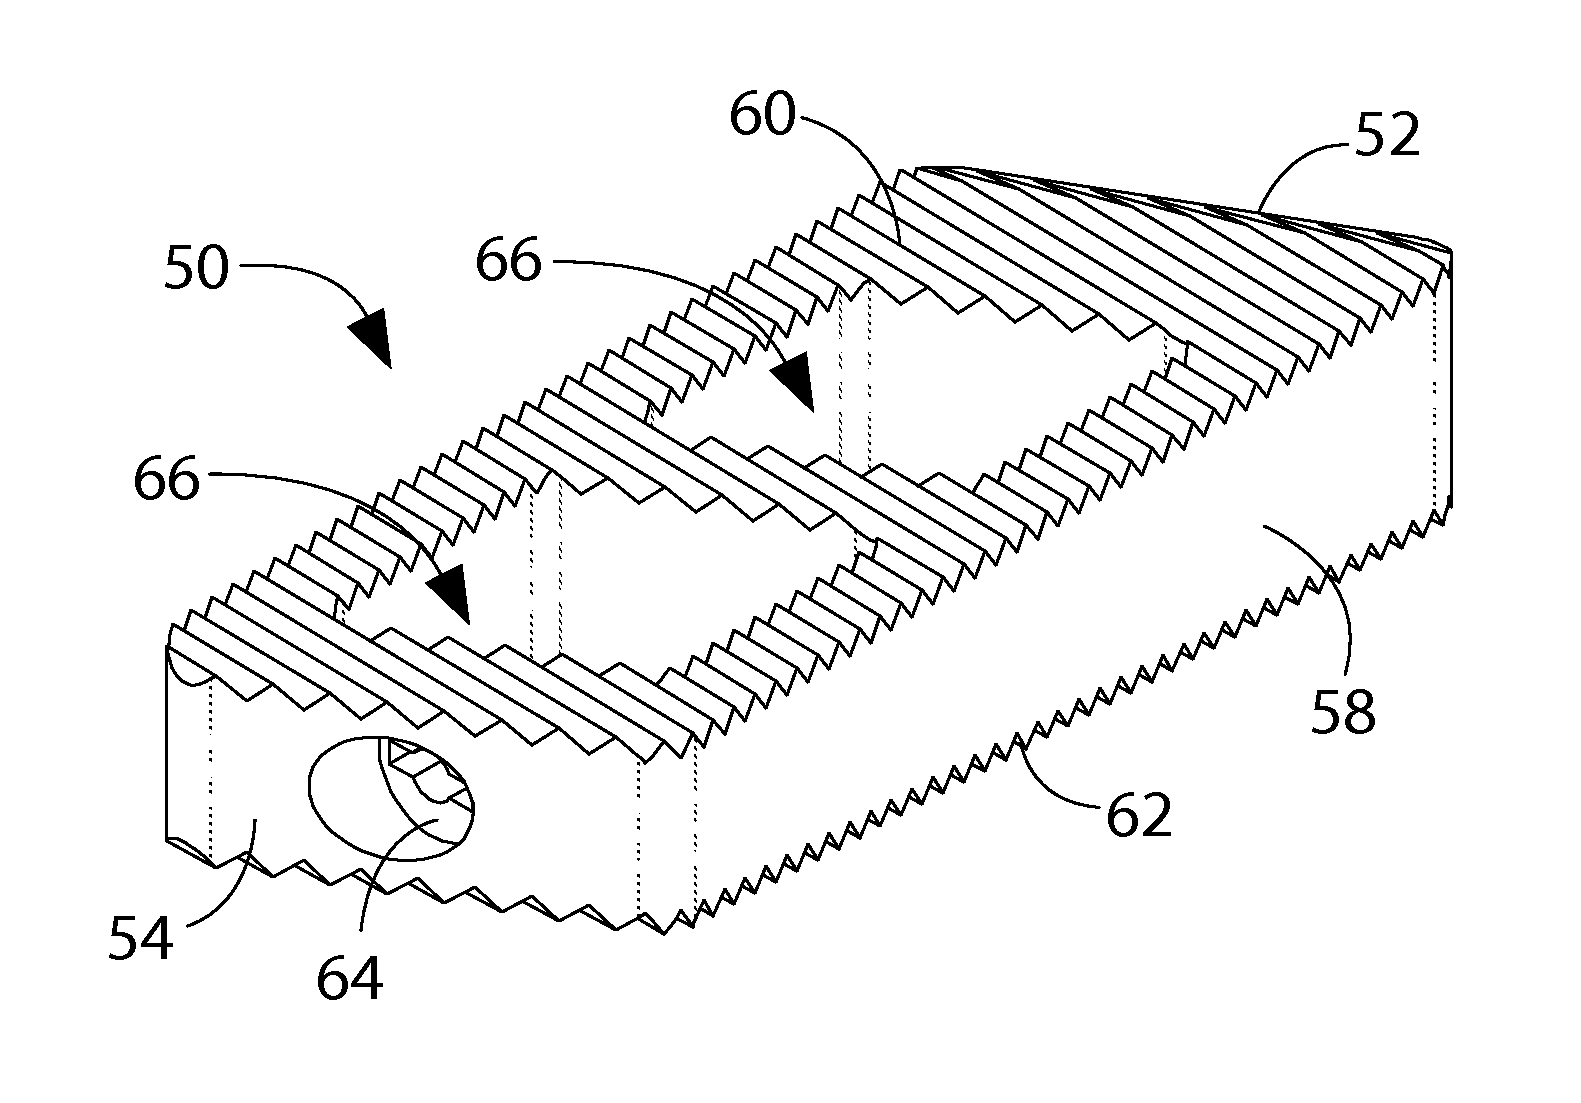 Interbody Cage for Spinal Fusion and Method of Implanting Interbody Cages into Spines